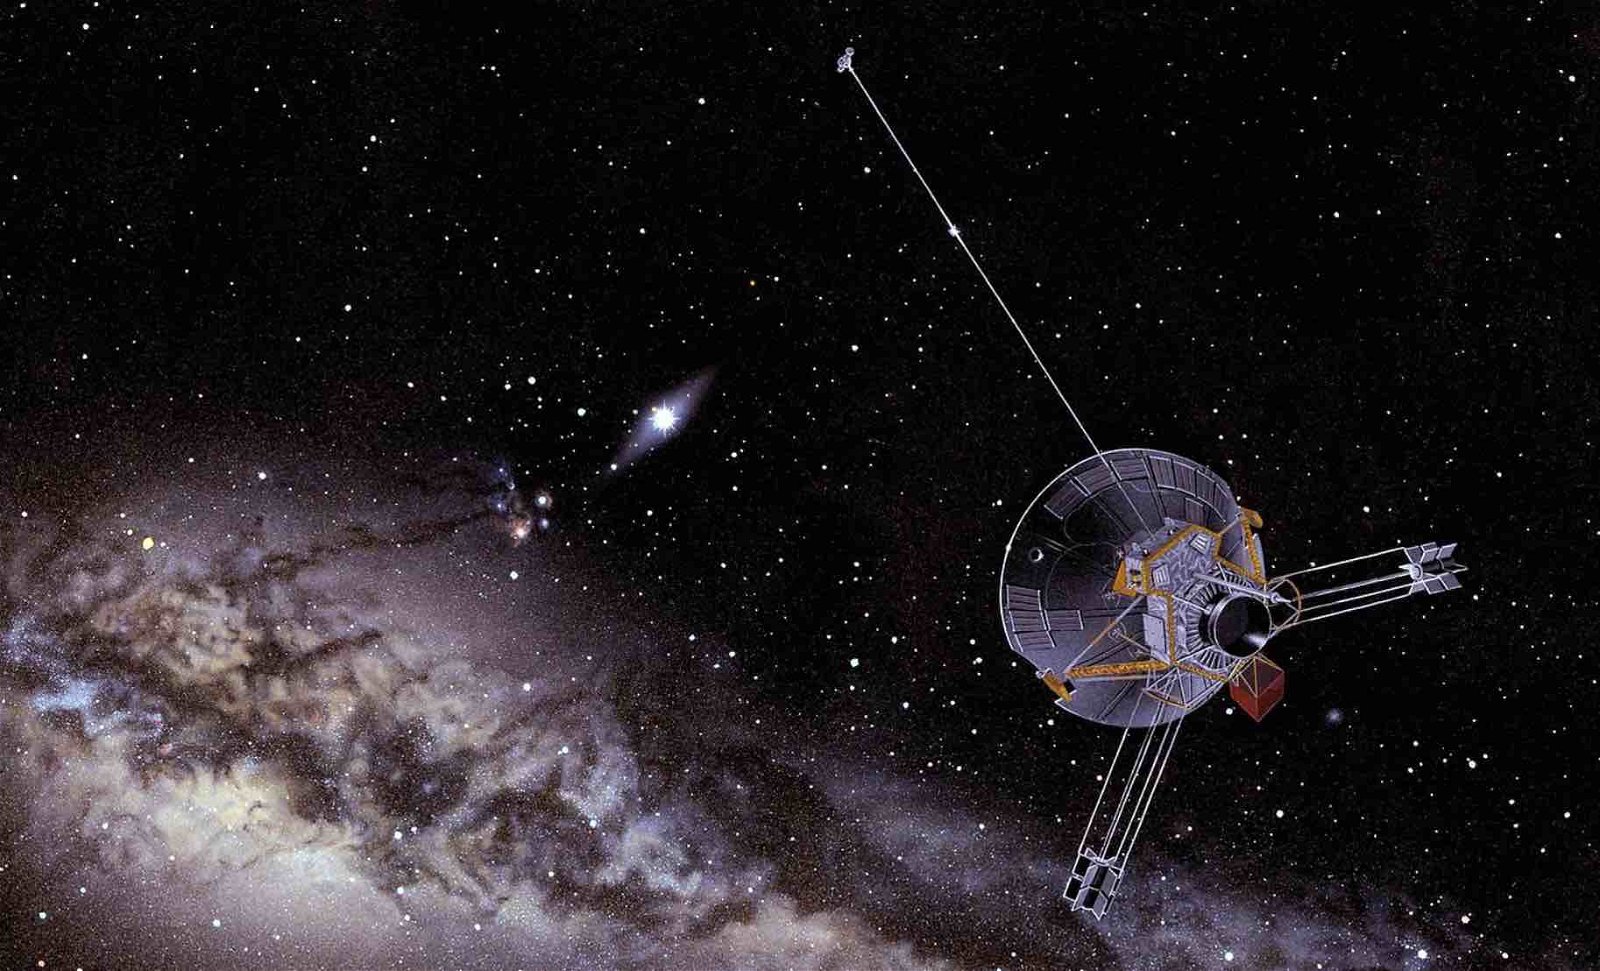 NASA Needs a "Miracle" to Save Voyager 1 - The Debrief